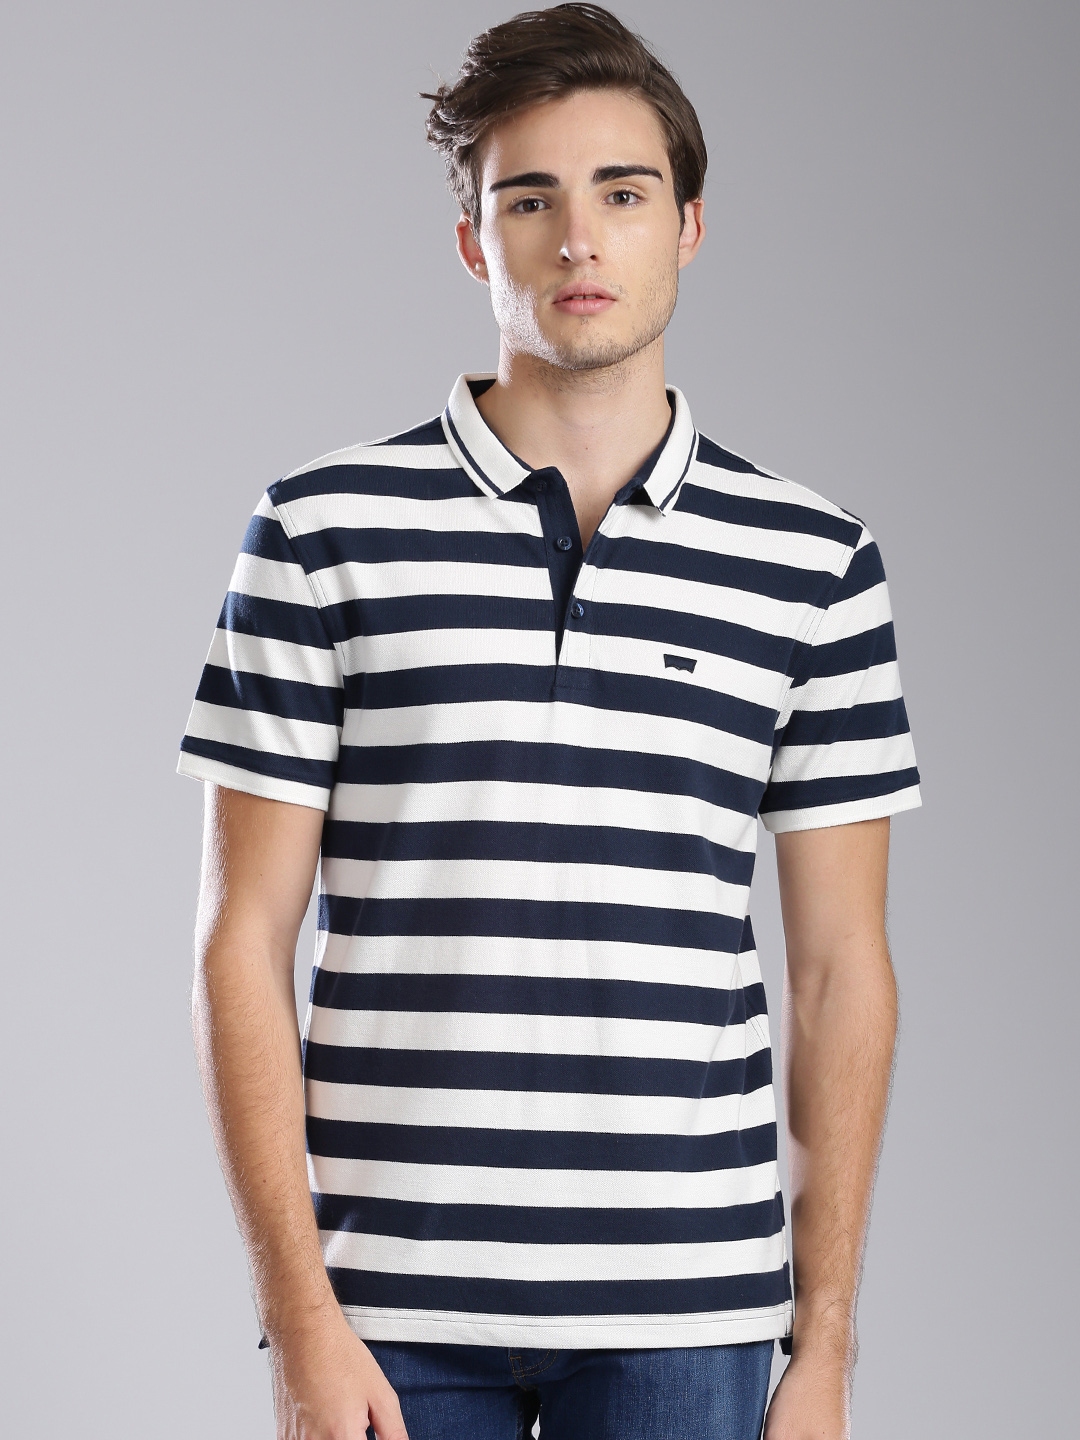 Buy Levis Men Navy White Striped Polo Pure Cotton T Shirt - Tshirts for Men  1833021 | Myntra